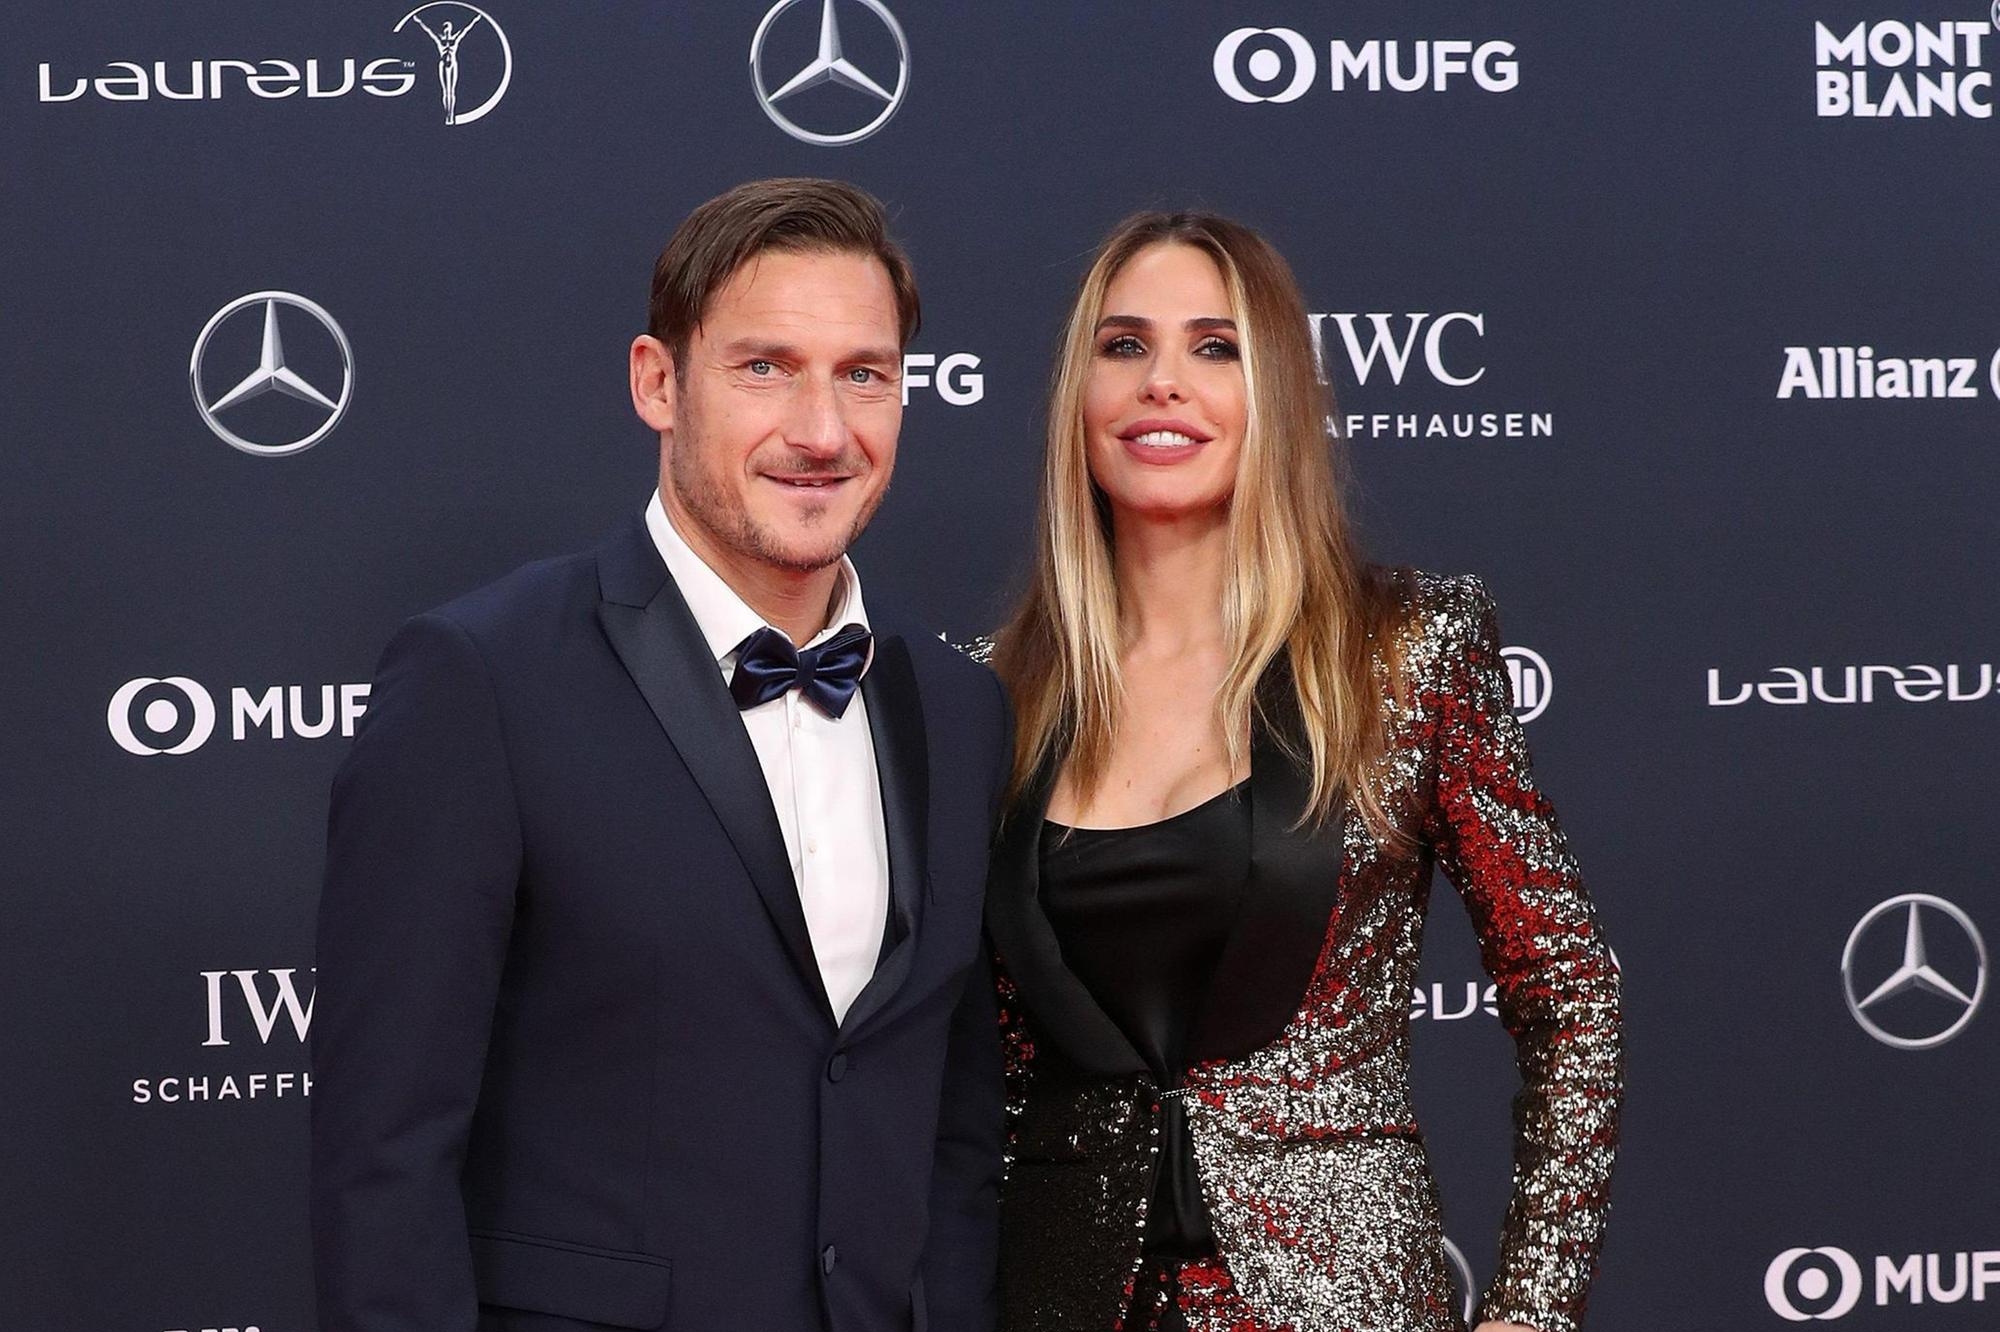 epa06569287 Former Italian soccer player Francesco Totti (L) and his wife Ilary Blasi (R) arrive at the 2018 Laureus World Sports Awards in Monaco, 27 February 2018. The annual Laureus Awards are held to honor people whom make a notable impact and remarkable accomplishments in the world of sport throughout the year. EPA/SEBASTIEN NOGIER